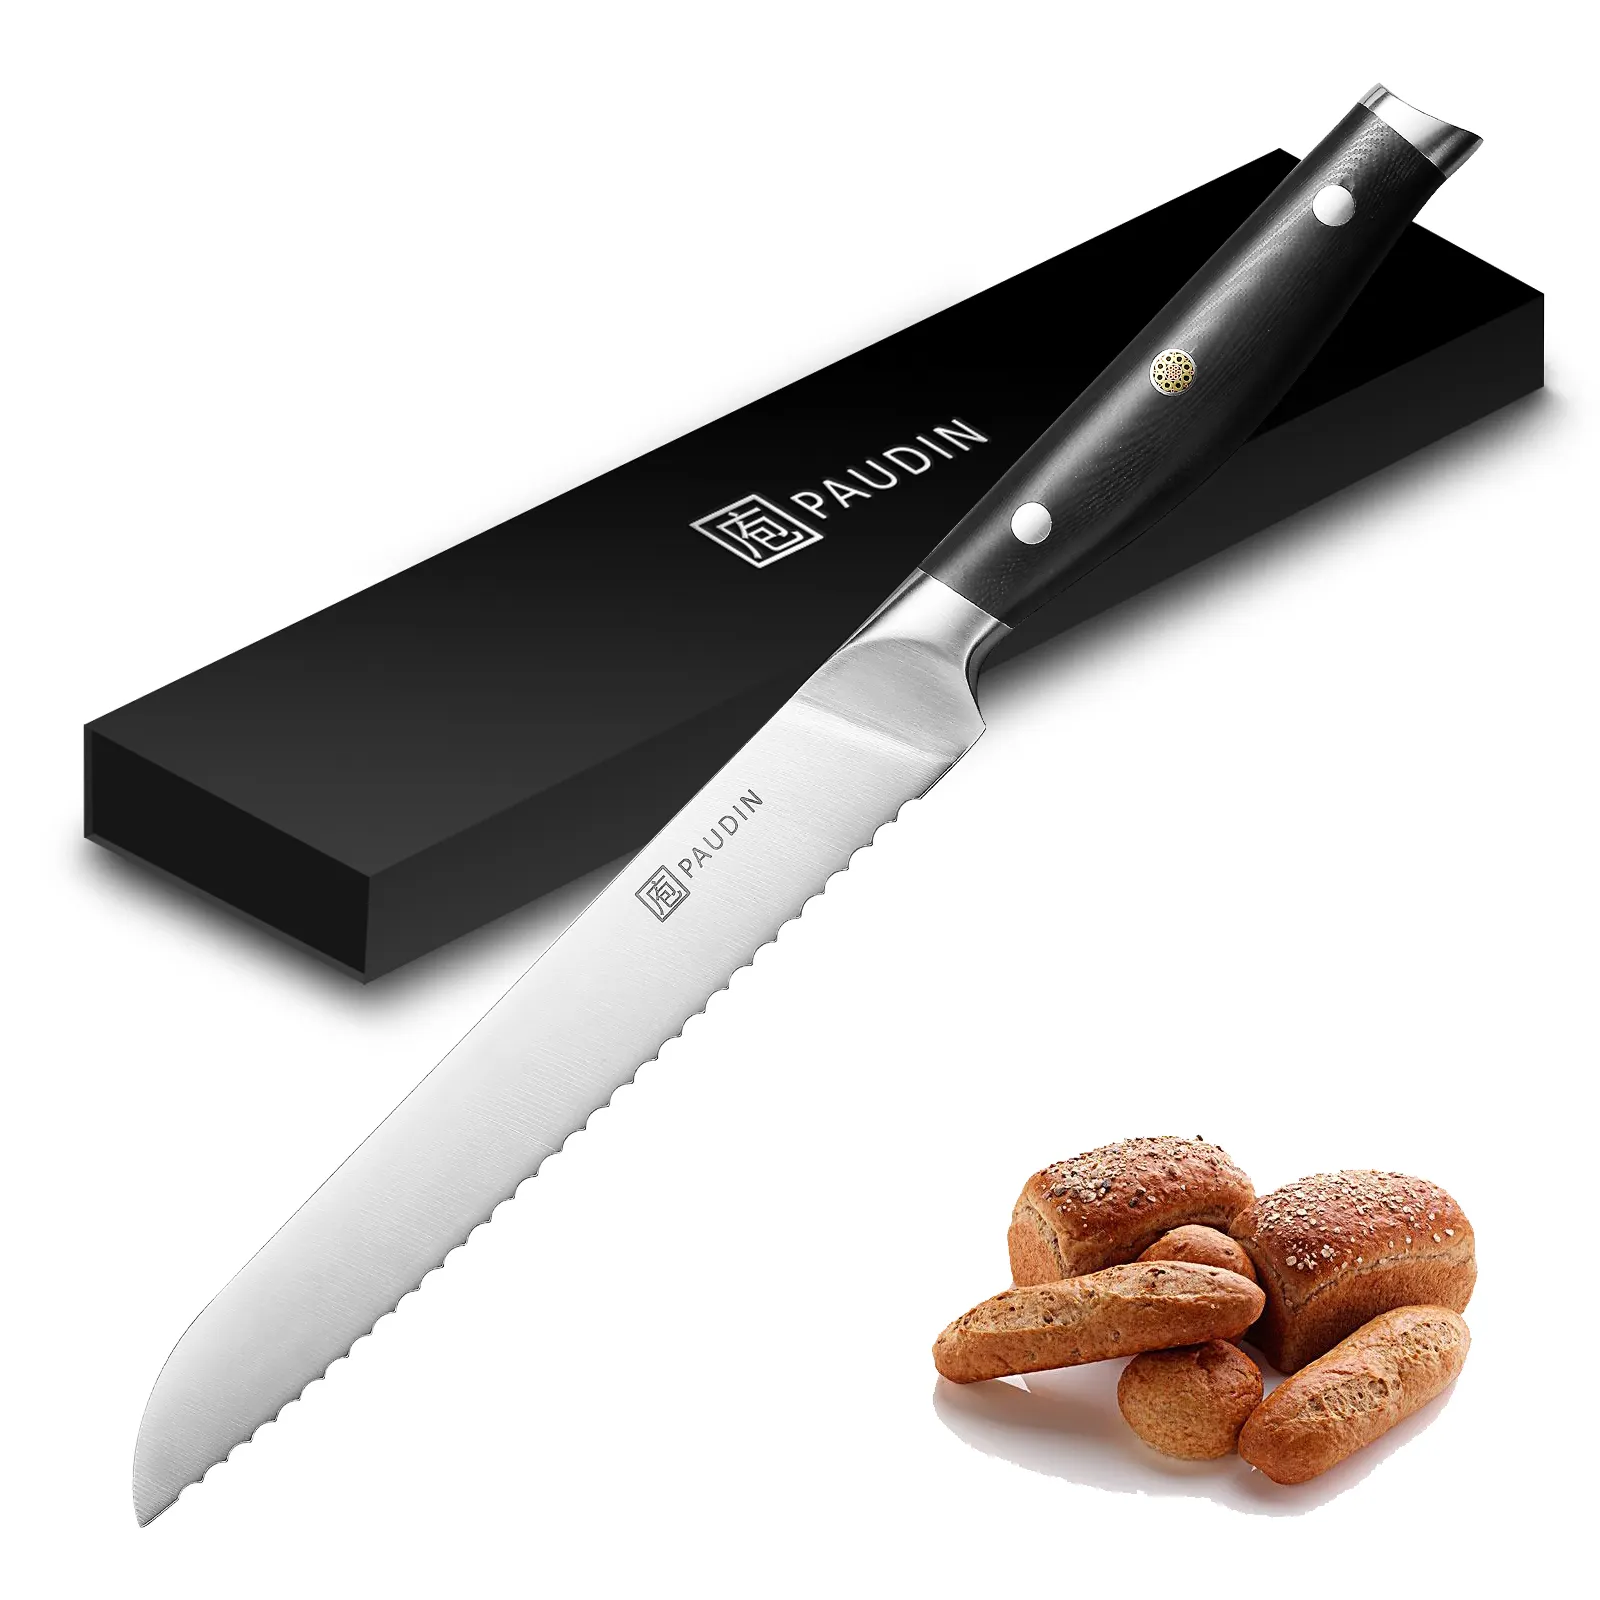 8 inch carbon steel bread knife slicer professional stainless kitchen chef knife utensils ergonomic handle cutlery set